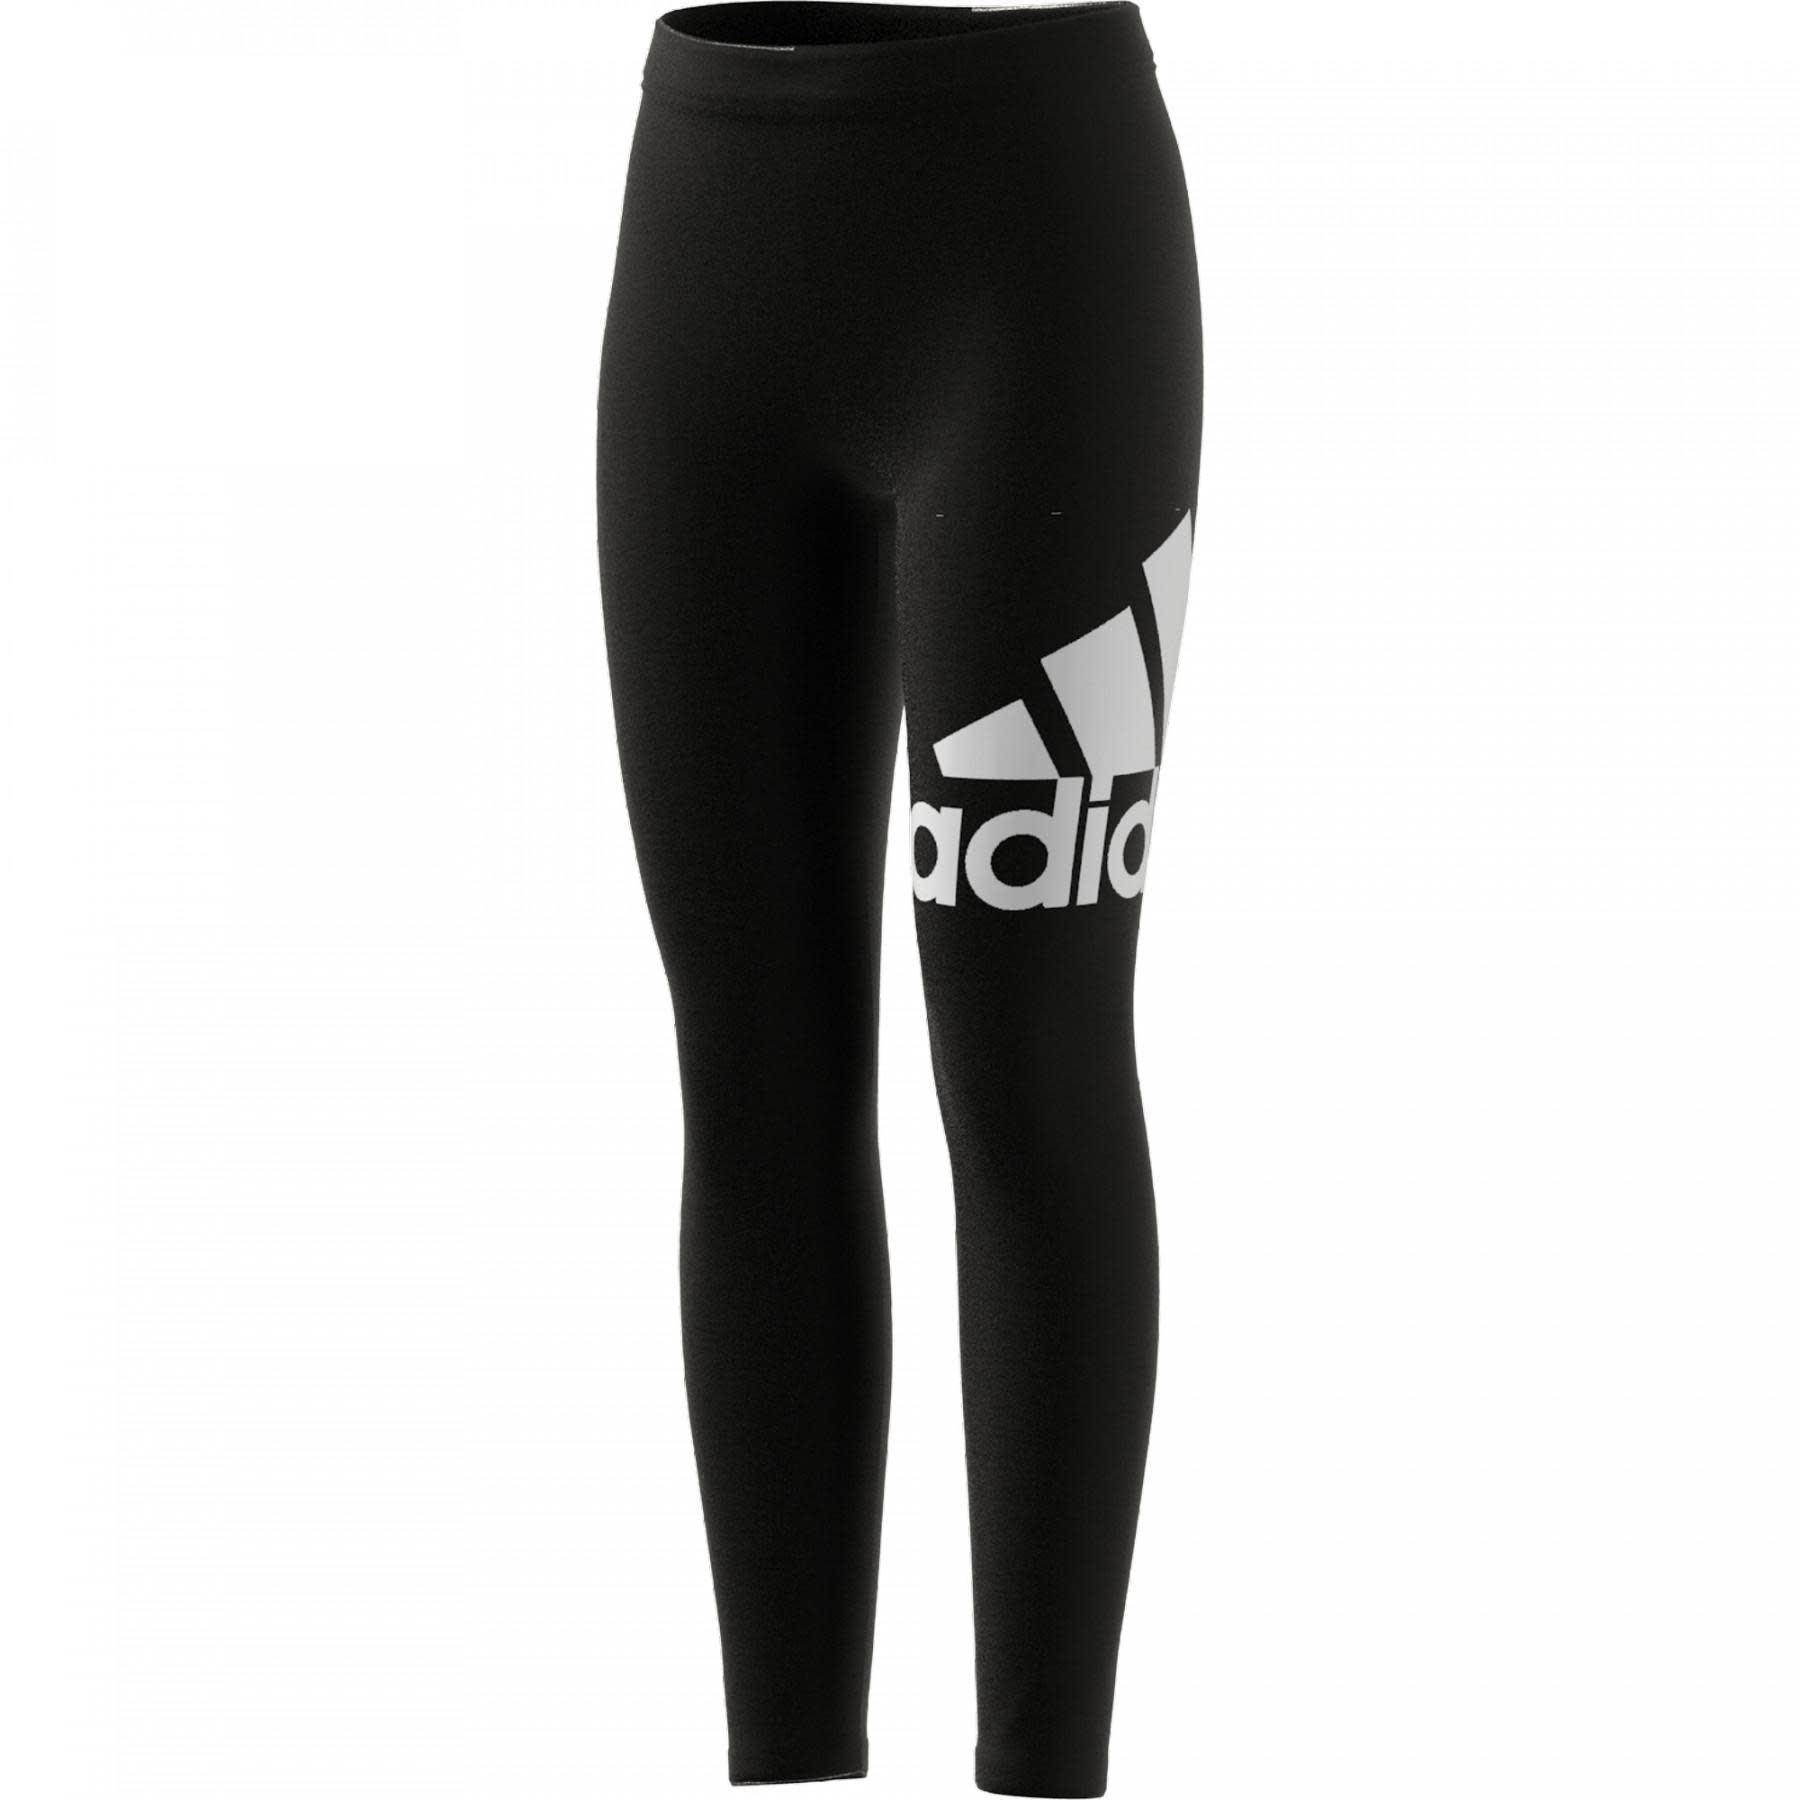 Adidas Adidas Leggings, Essential Tight, Girls - Time-Out Sports Excellence